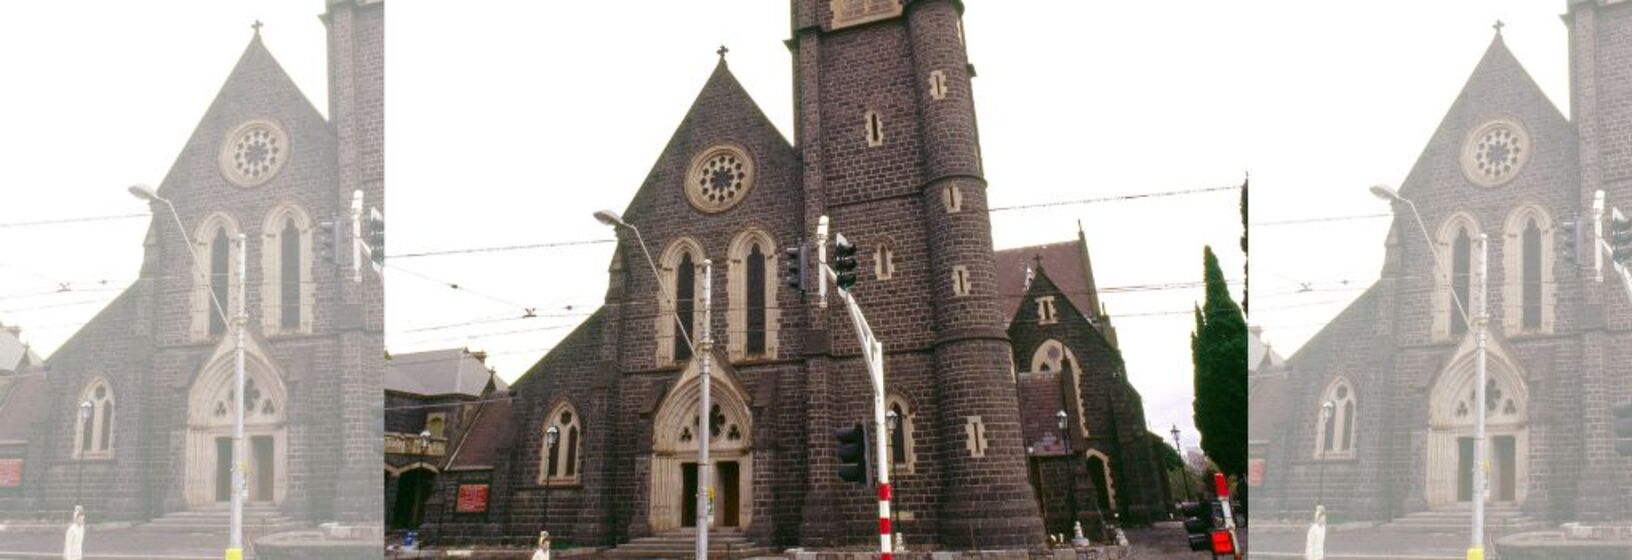 Building facade of brown brick church with steeple/bell tower